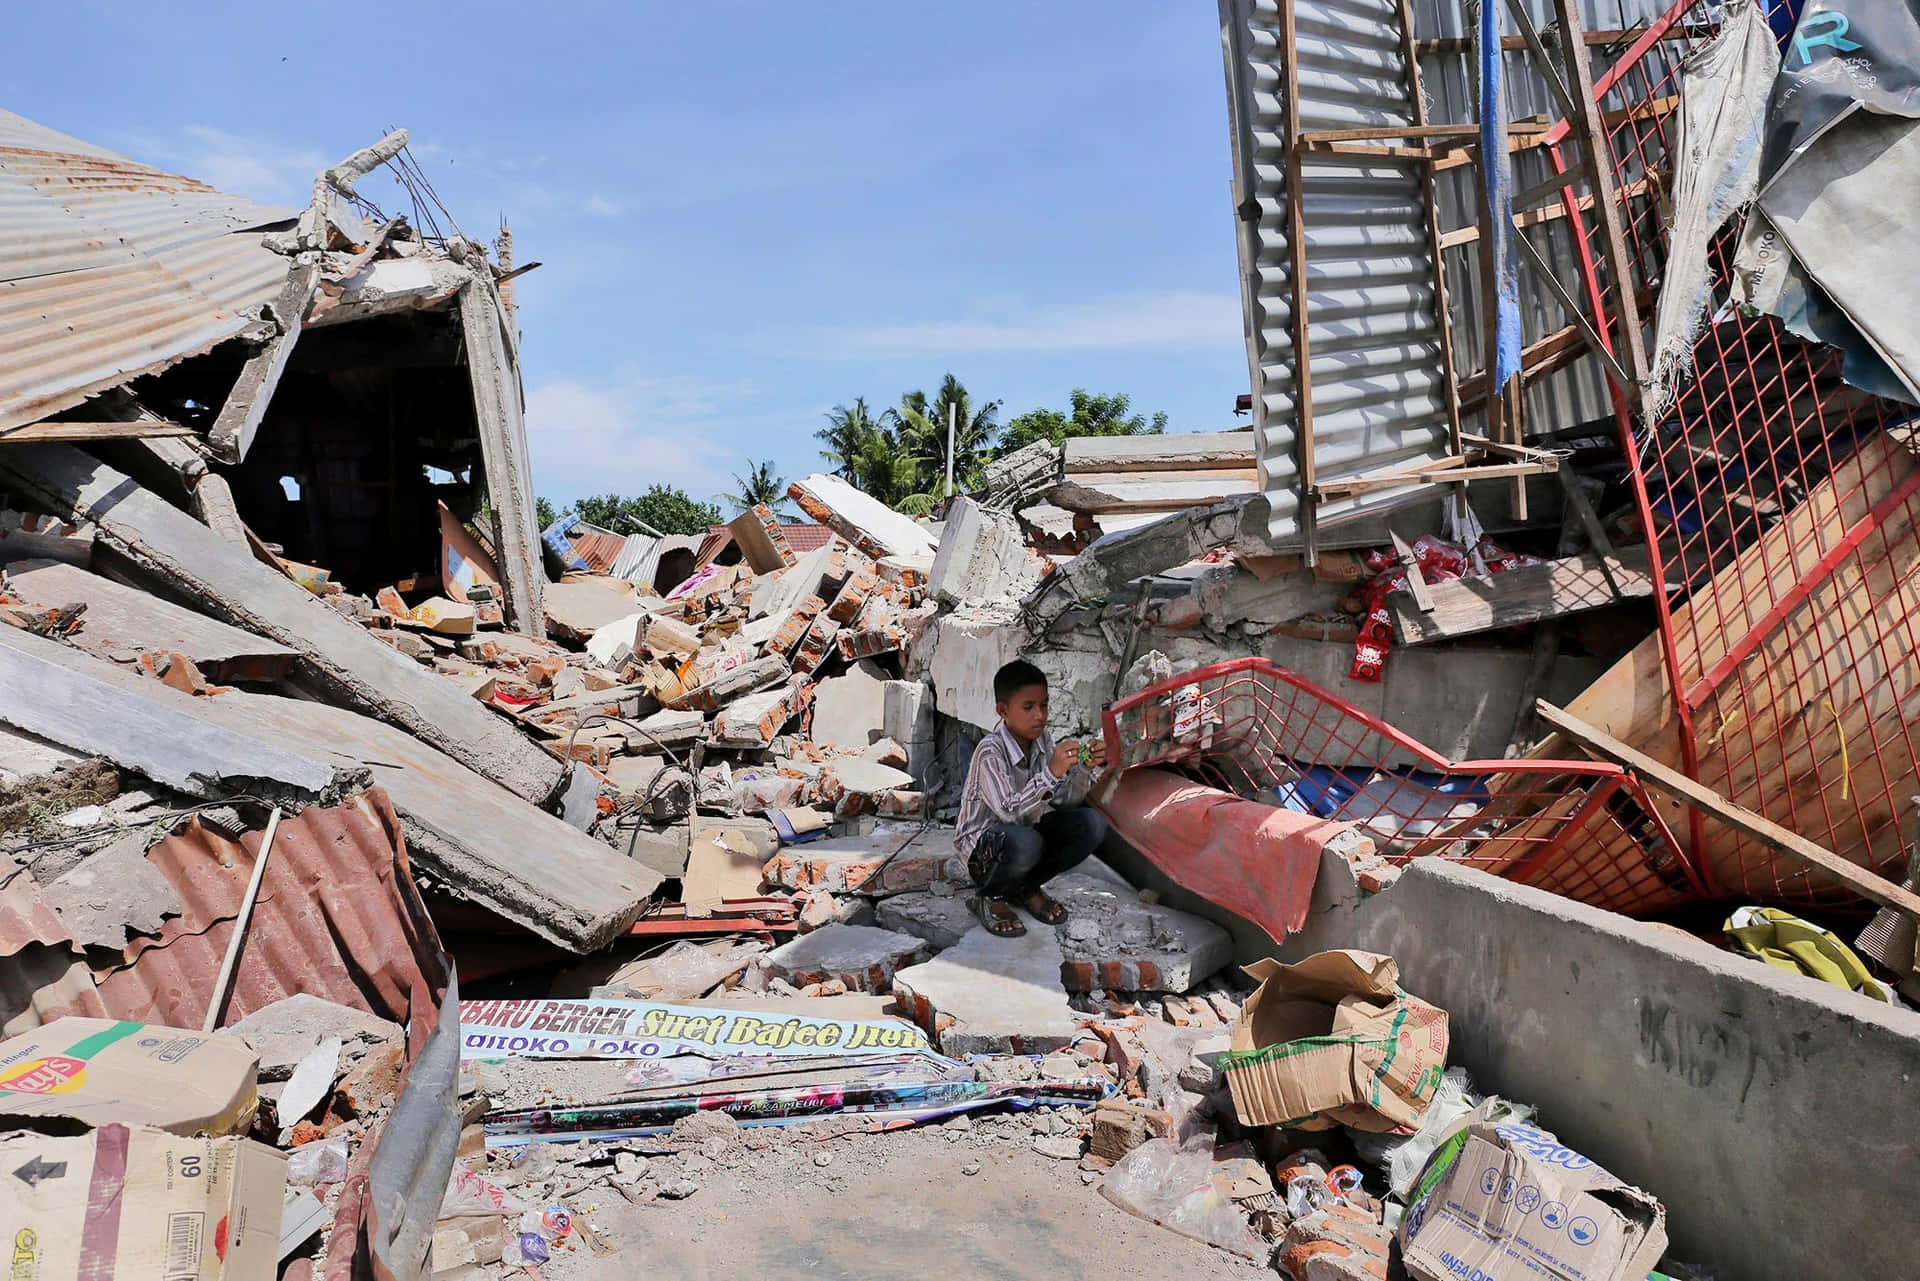 A Man Sits In The Rubble Of A Building